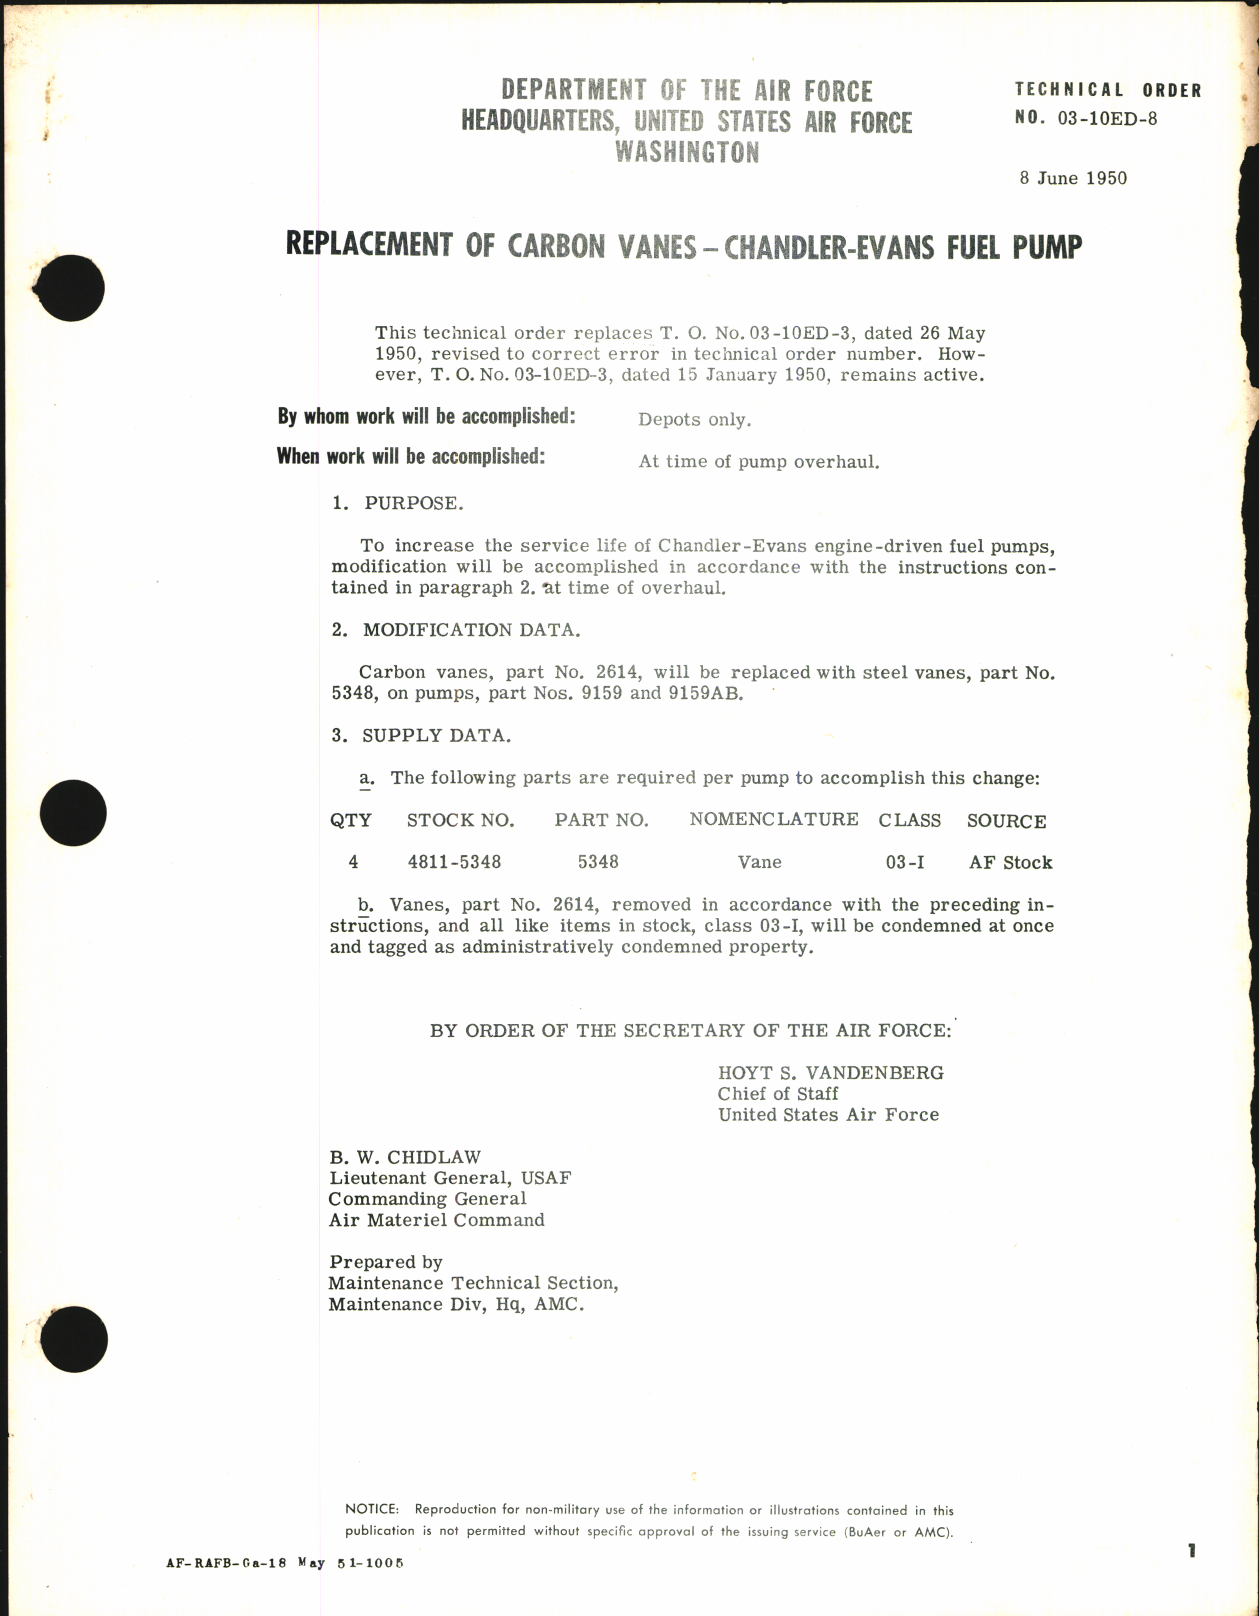 Sample page 1 from AirCorps Library document: Replacement of Carbon Vanes in Chandler-Evans Fuel Pump